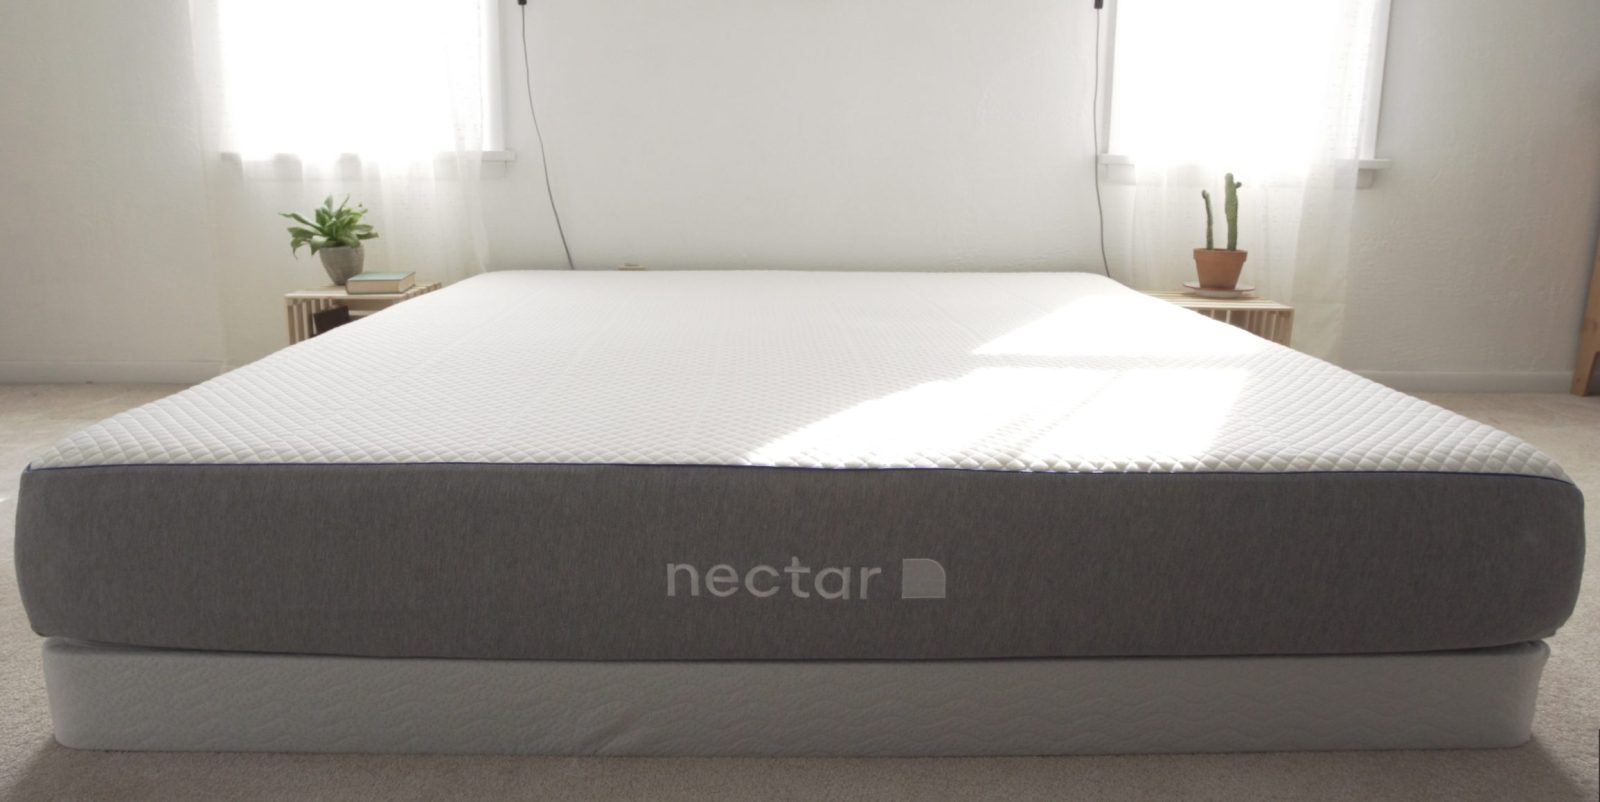 nectar bed and mattress in a box